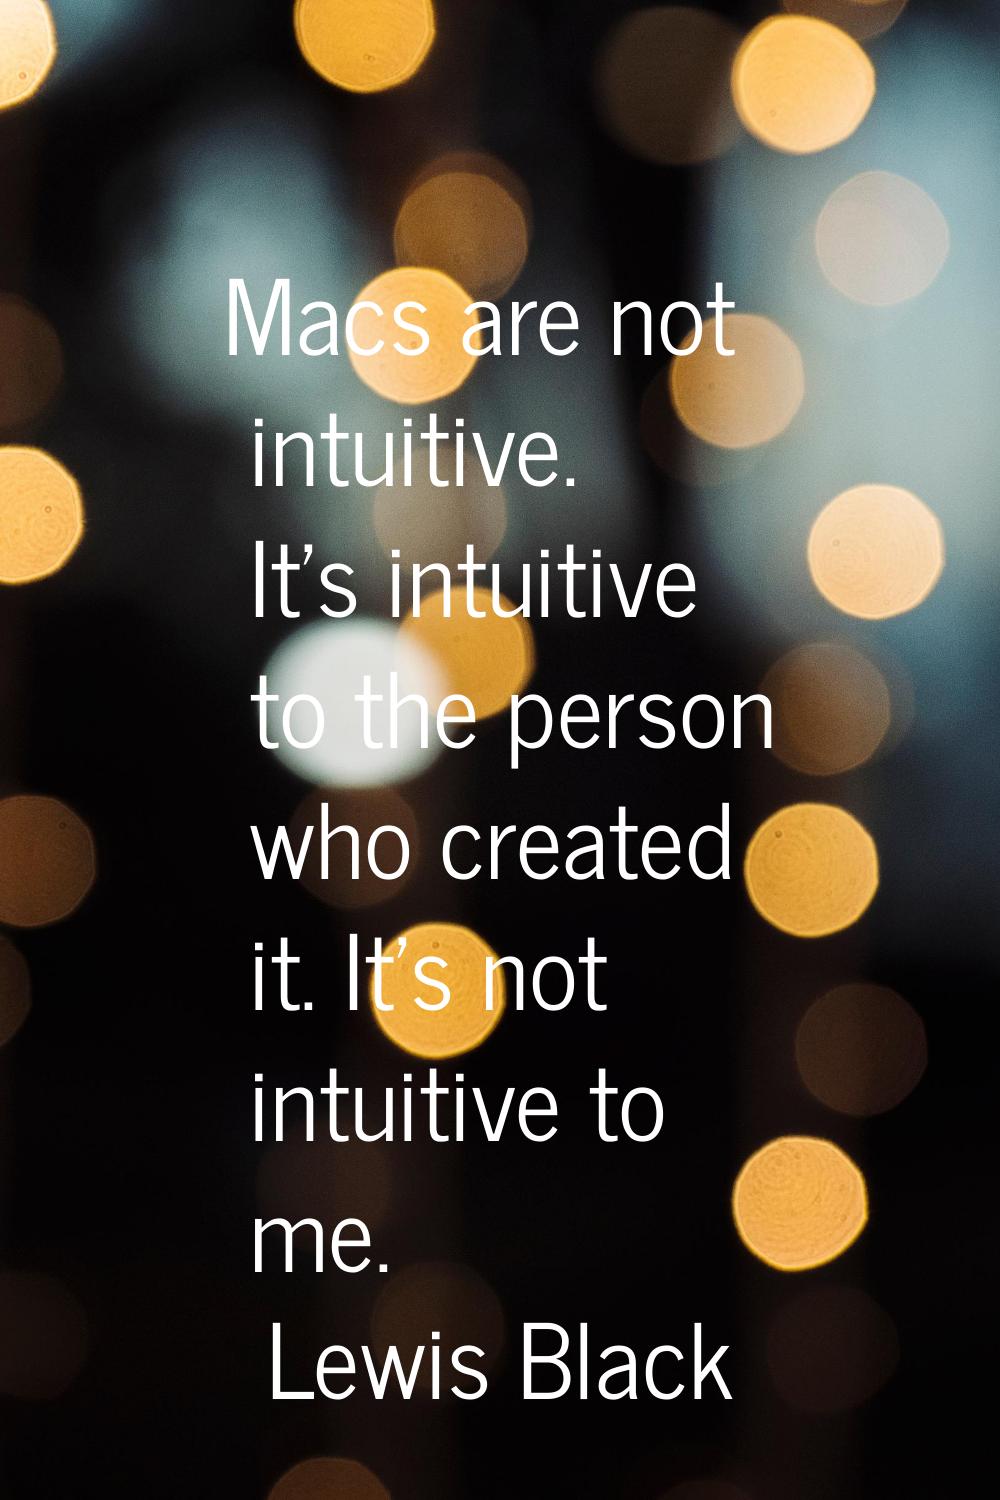 Macs are not intuitive. It's intuitive to the person who created it. It's not intuitive to me.